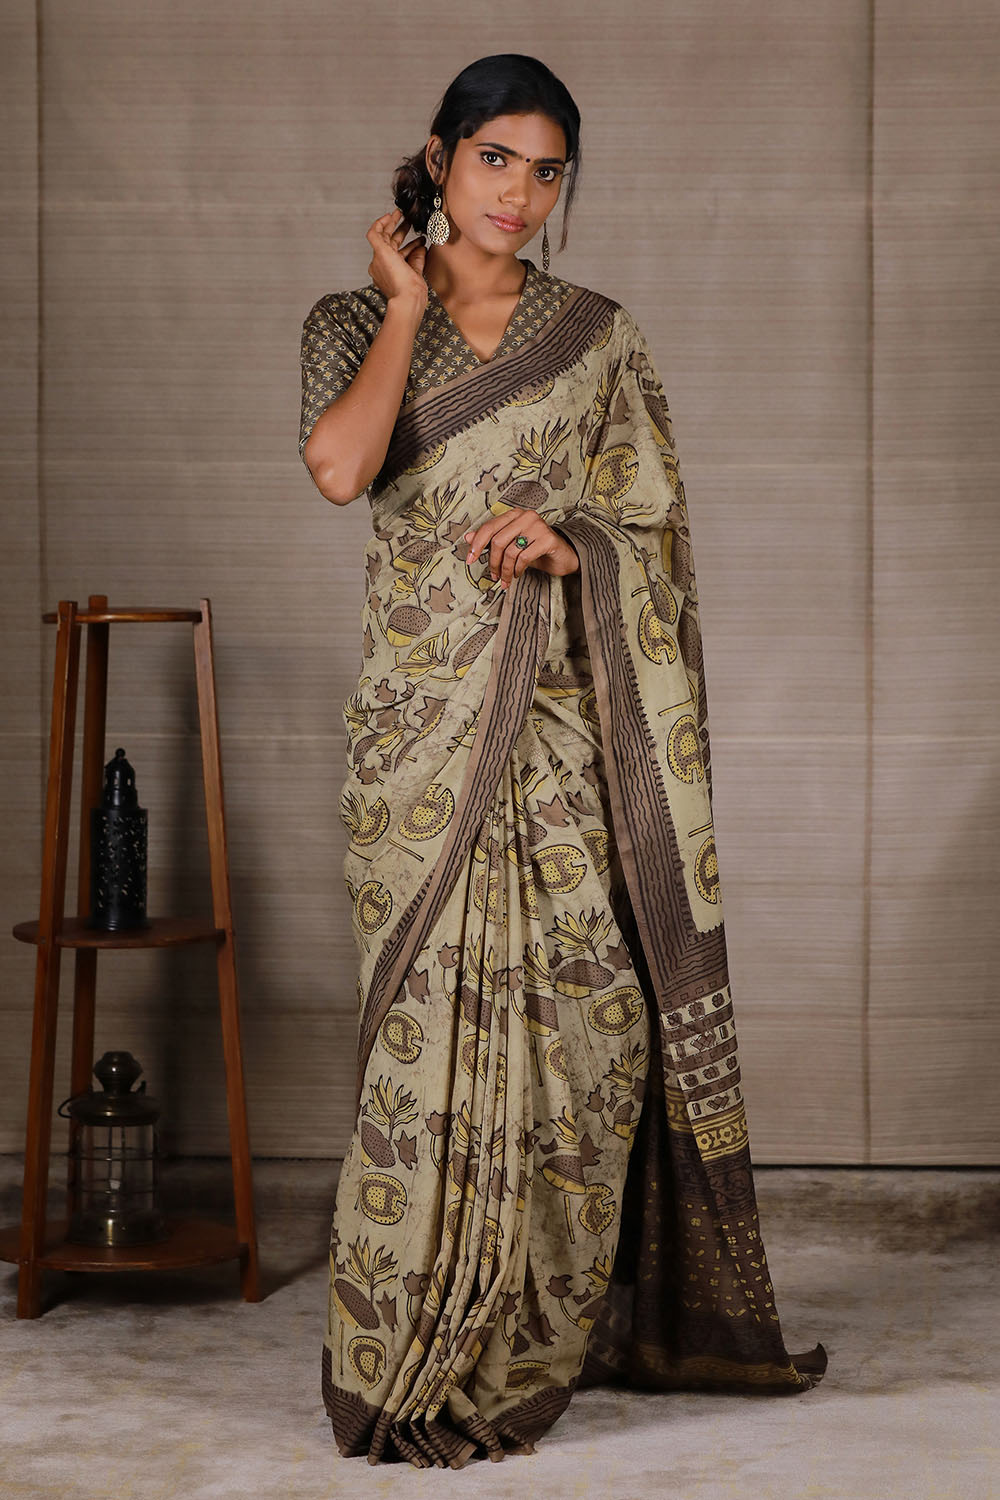 Buy T.J. SAREES Women's Pure Kantha Stitch hand embroidery assam Silk Saree  of Bengal With Blouse Pcs - Beige (Pack of 1) at Amazon.in